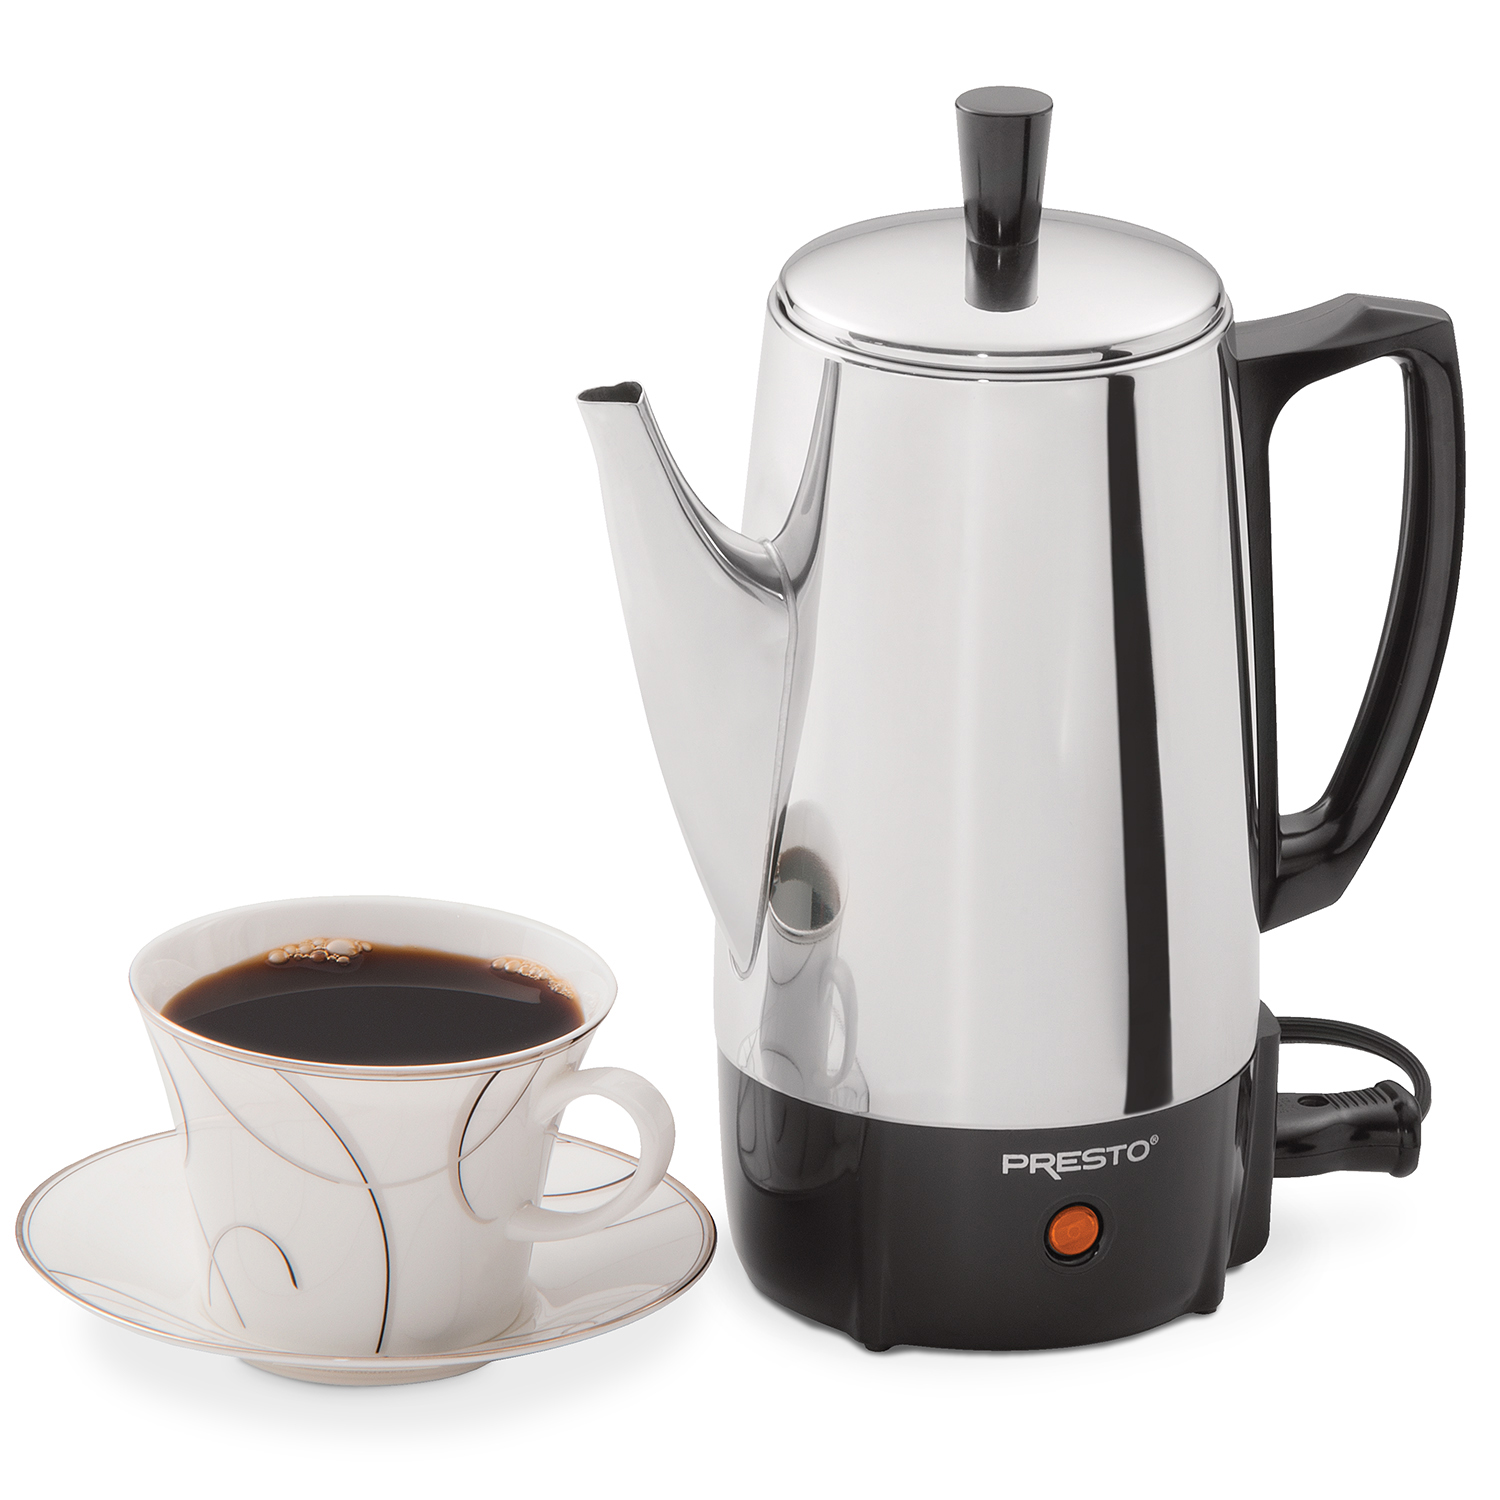 6-Cup Stainless Steel Coffee Maker - Coffee Makers - Presto® Presto 6 Cup Stainless Steel Coffee Percolator